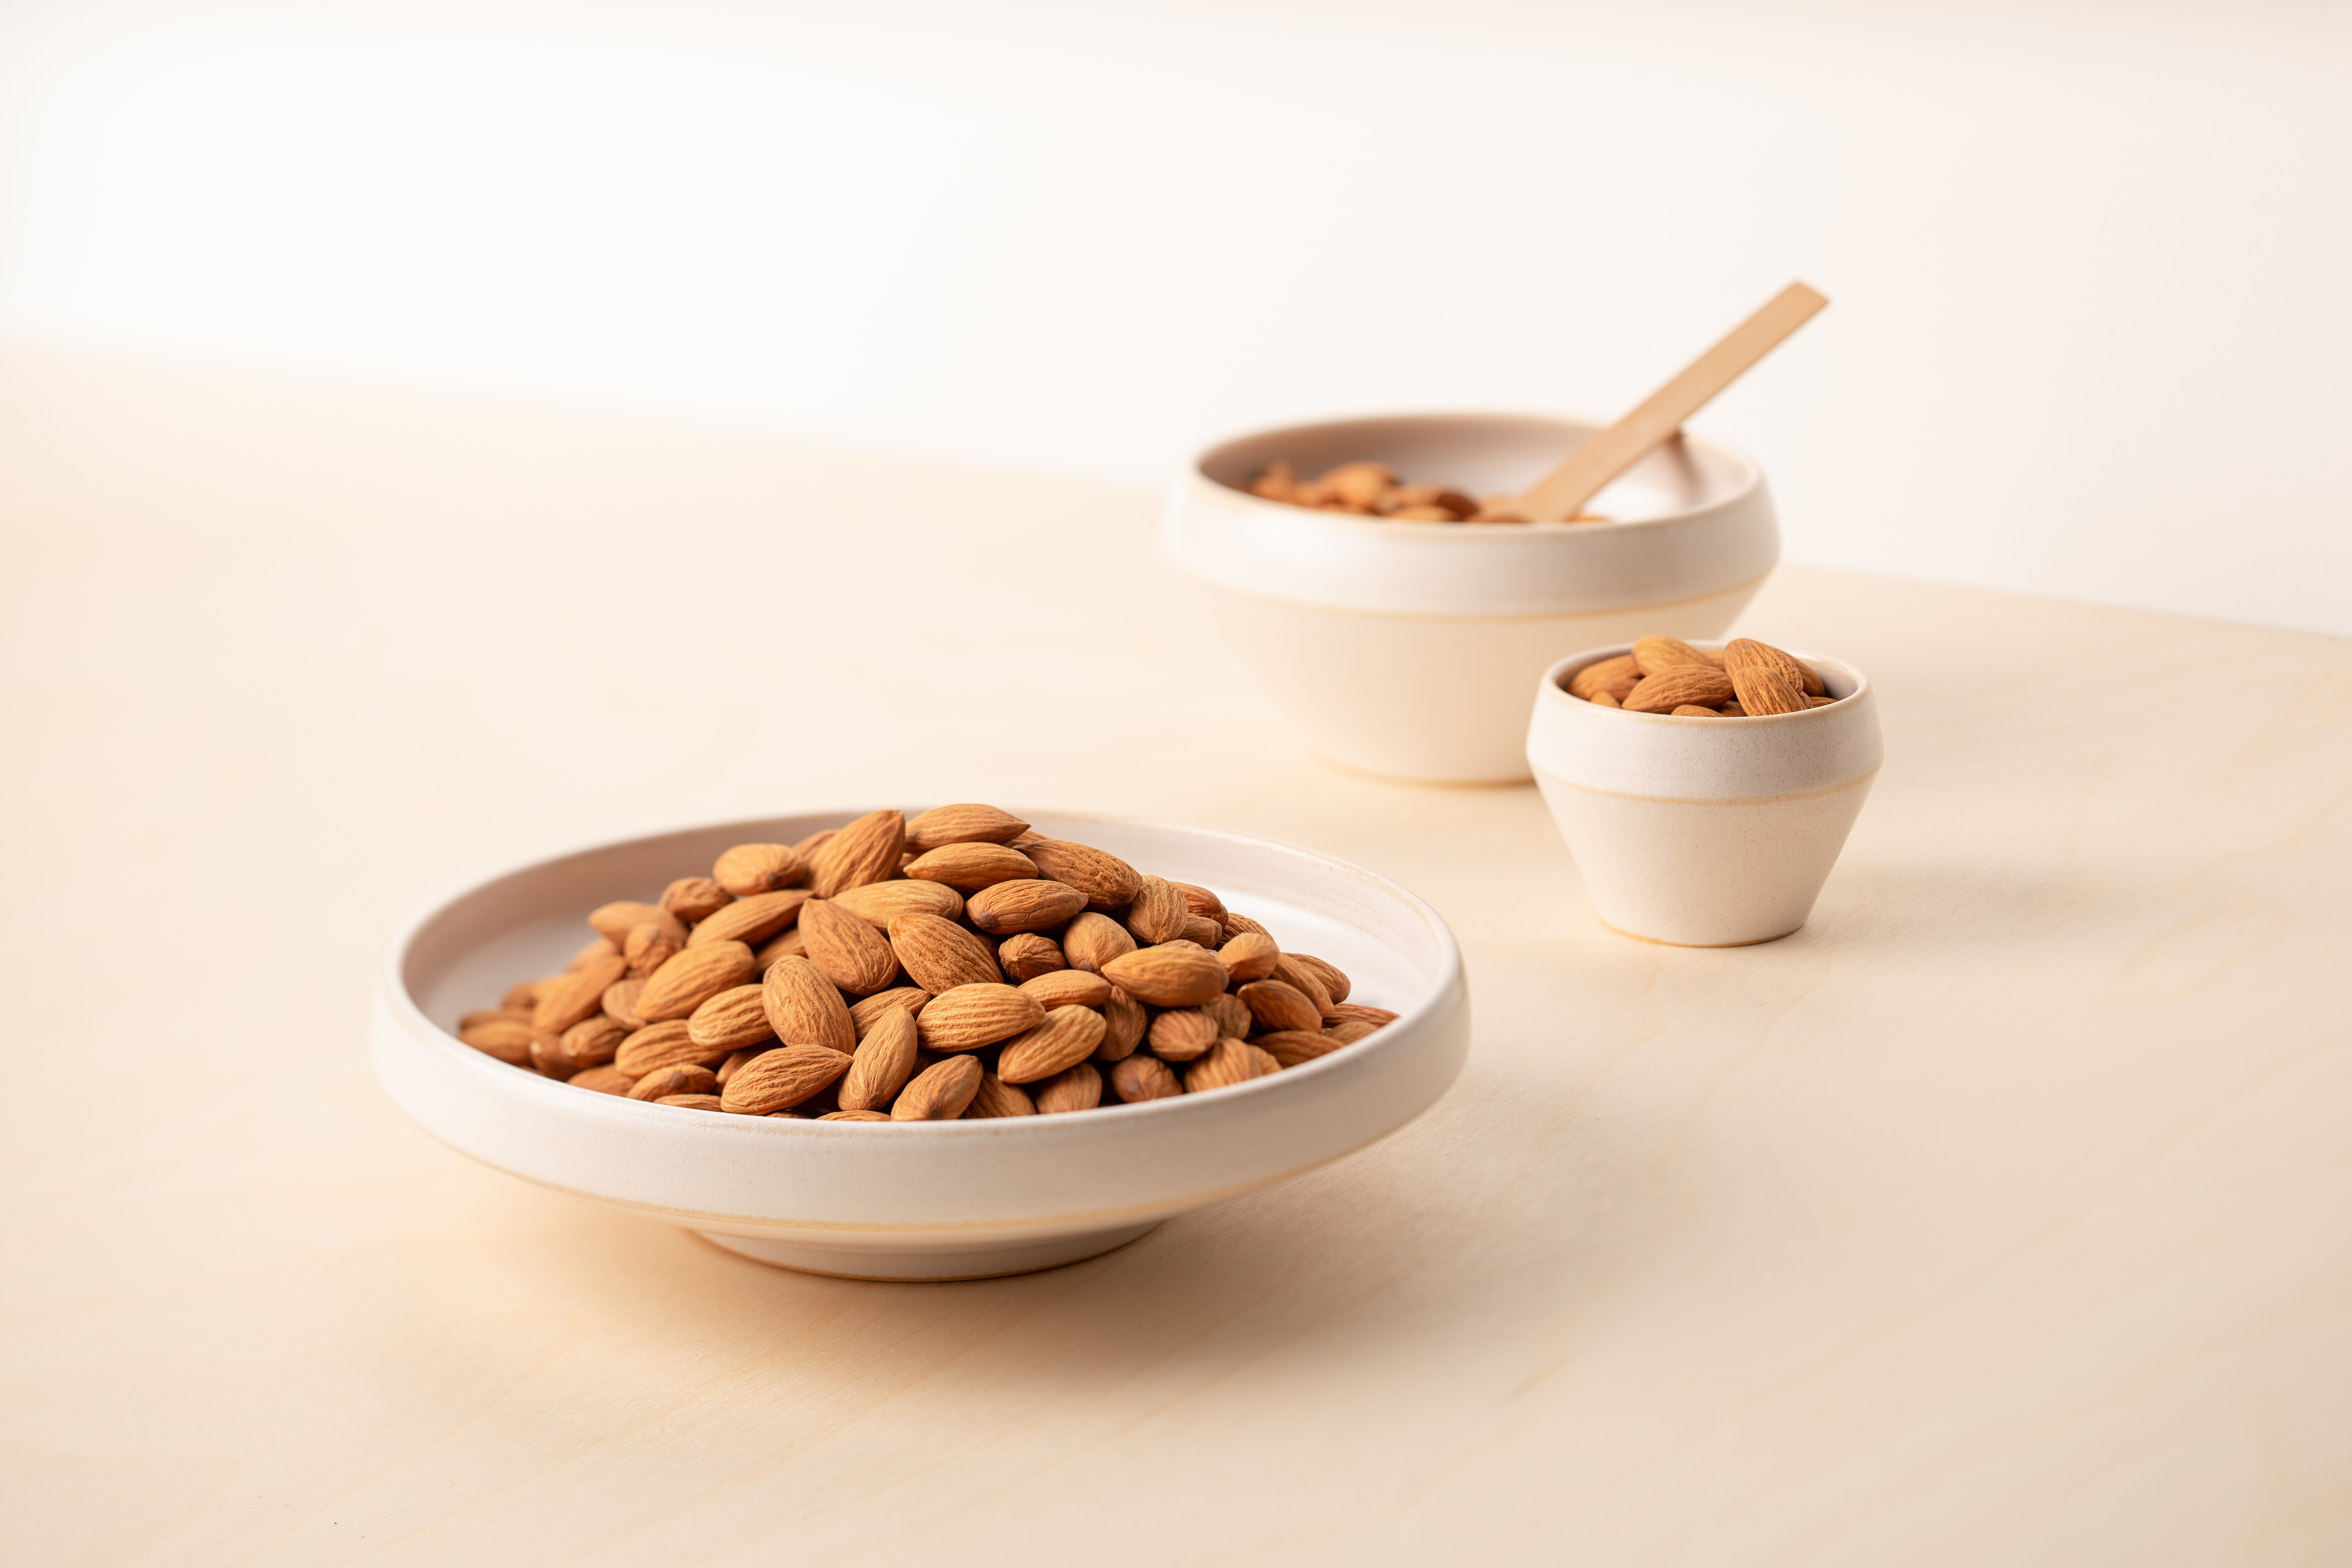 Bowls of Almonds